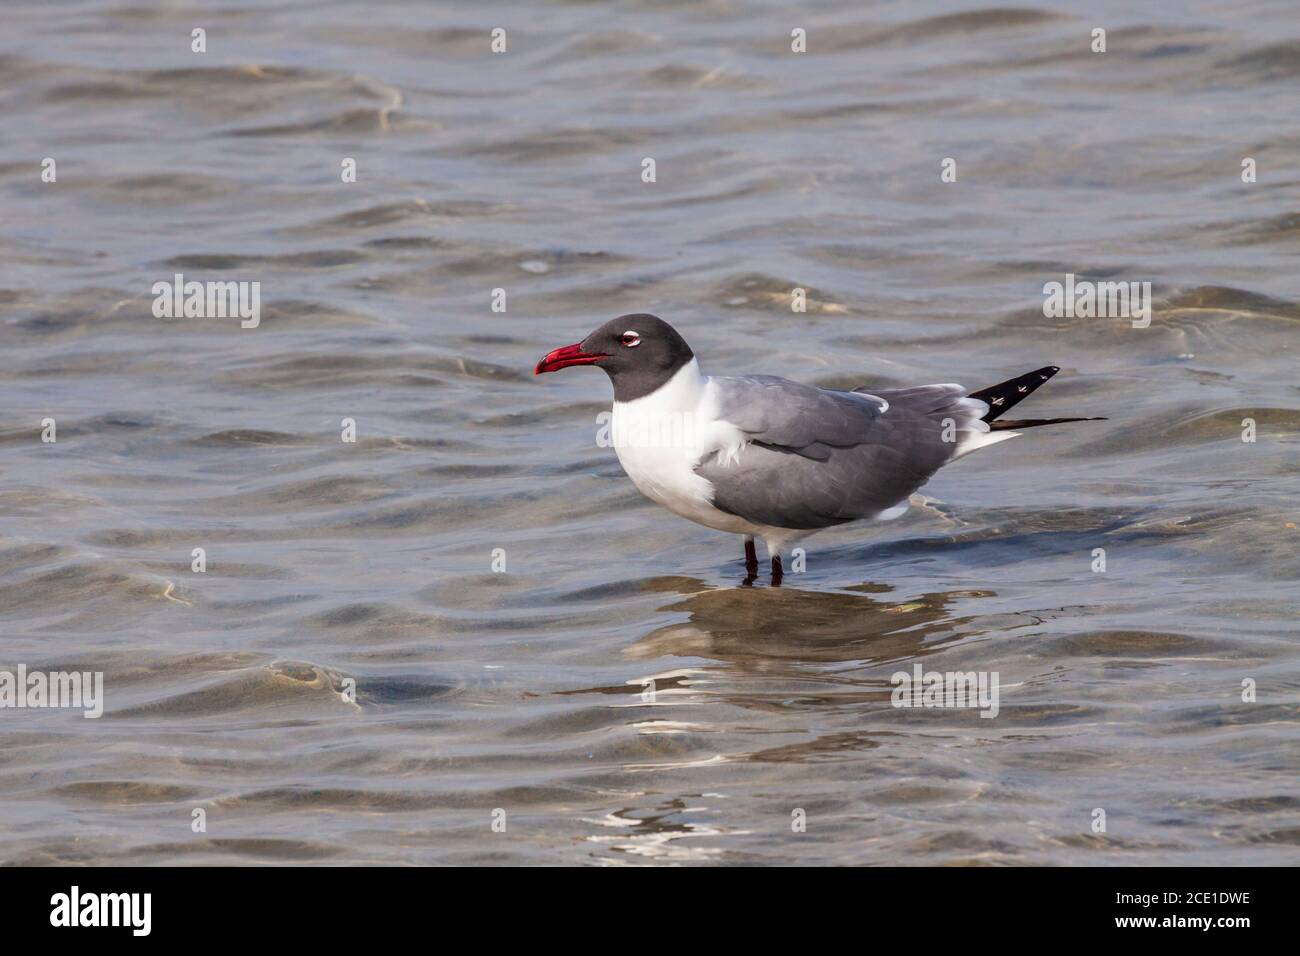 Laughing Gulls, Larus atricilla, at the South Padre Island Birding and Nature Center on the Texas Gulf Coast. Stock Photo